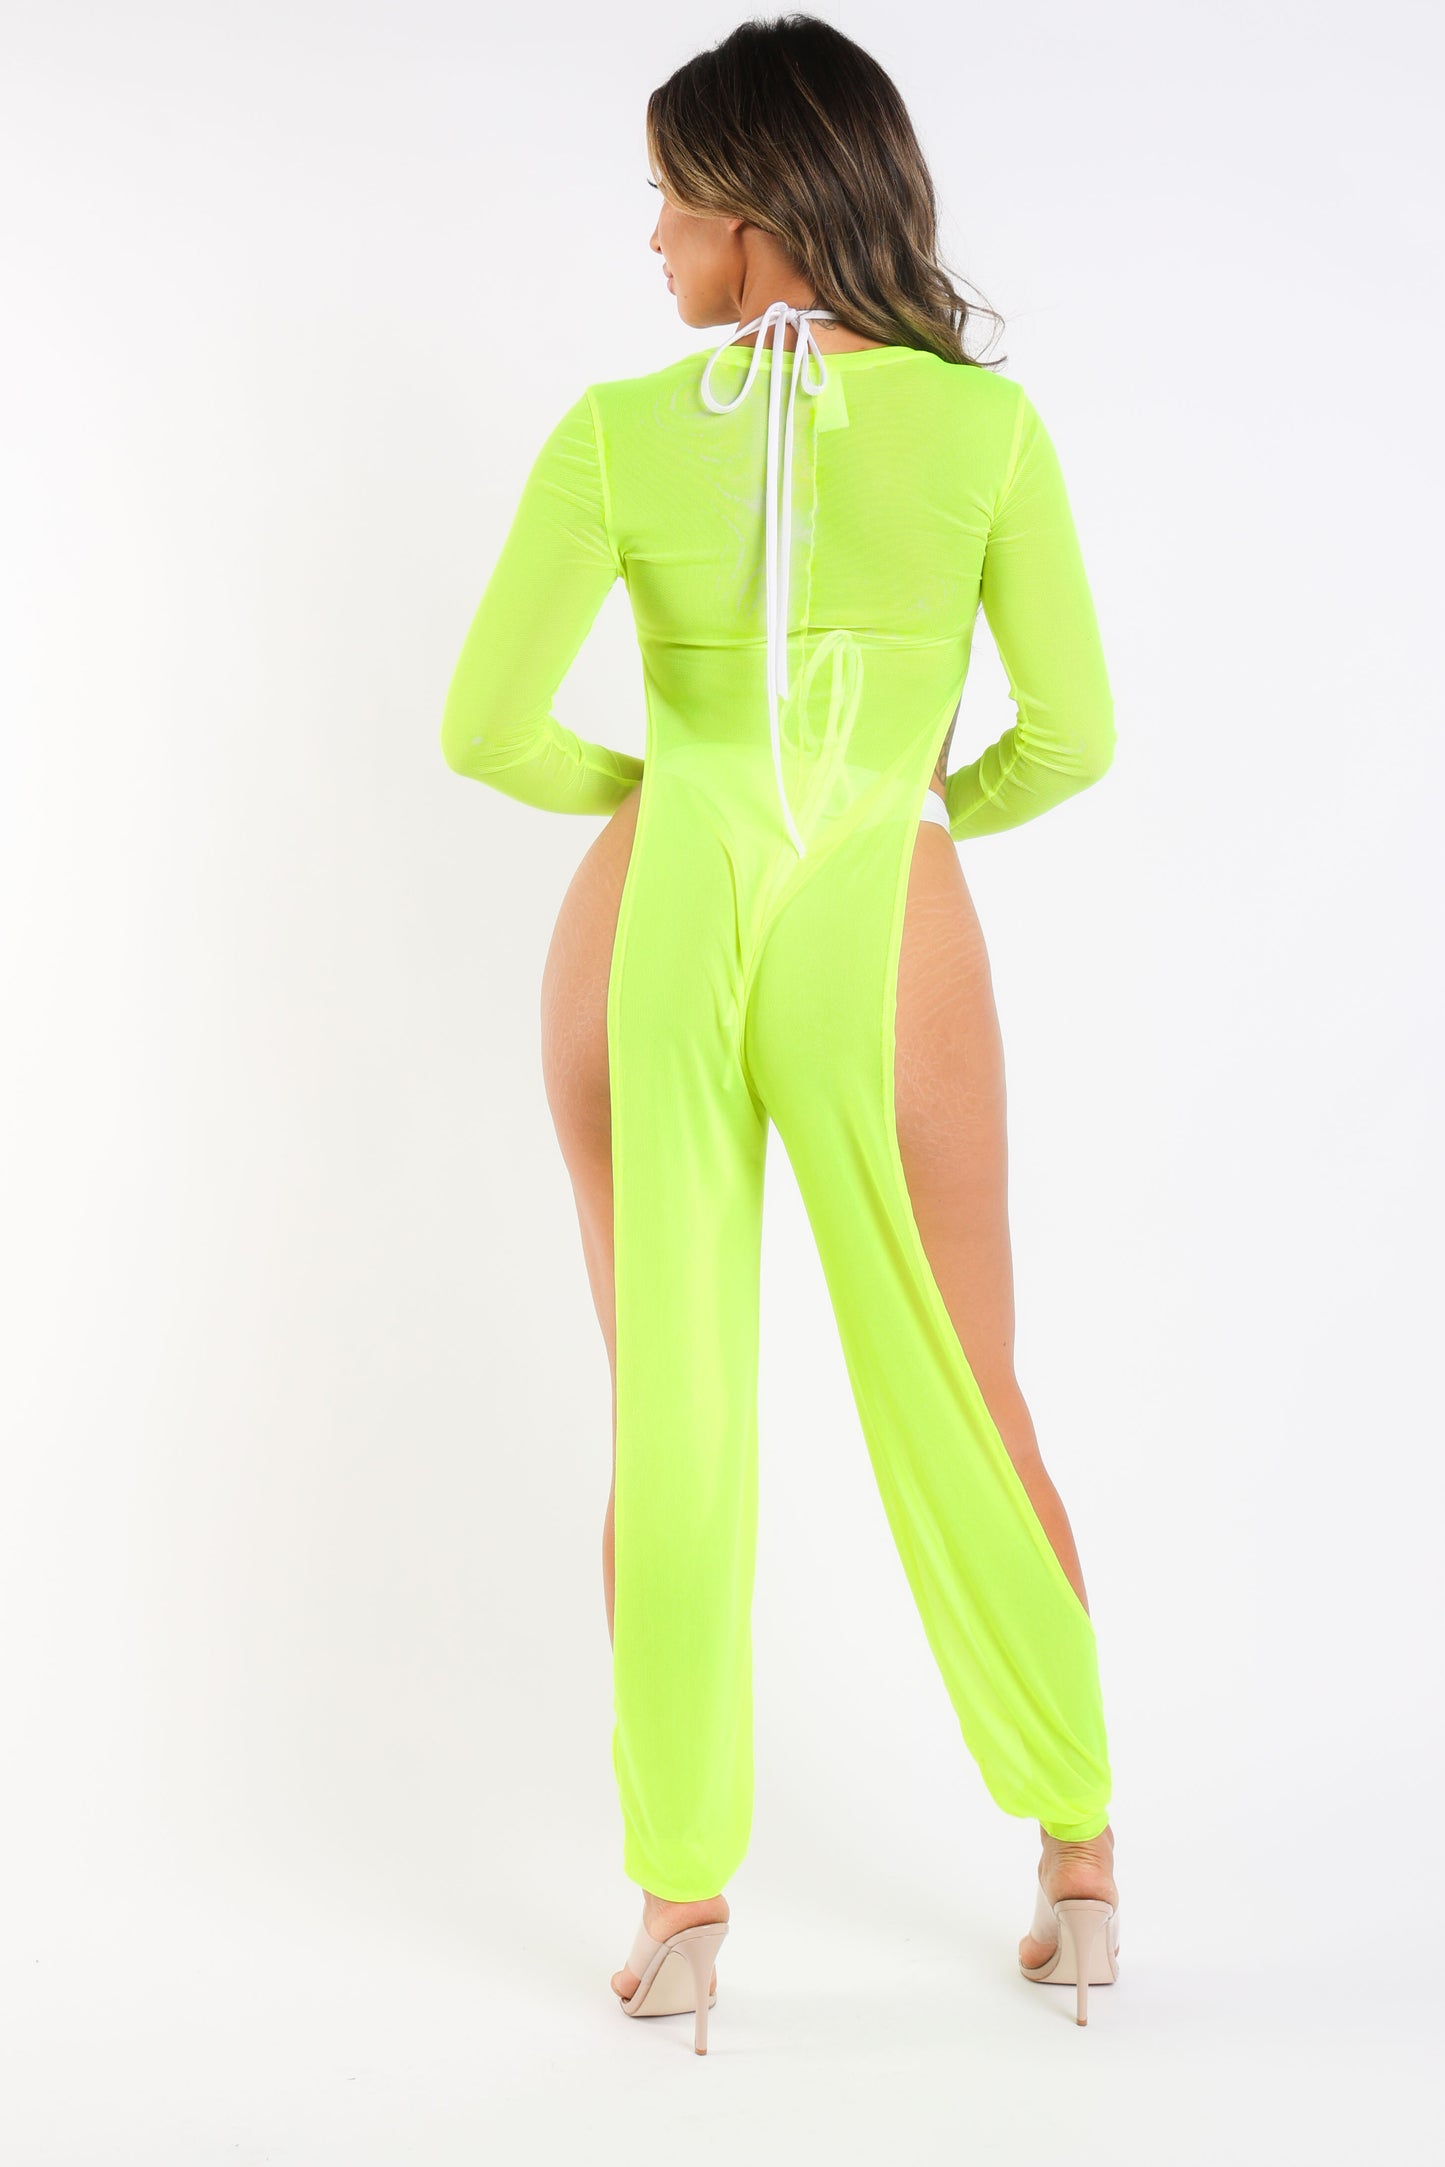 Sexy Mesh Cover Up Jumpsuit Summer Bodycon Beachwear NEON YELLOW